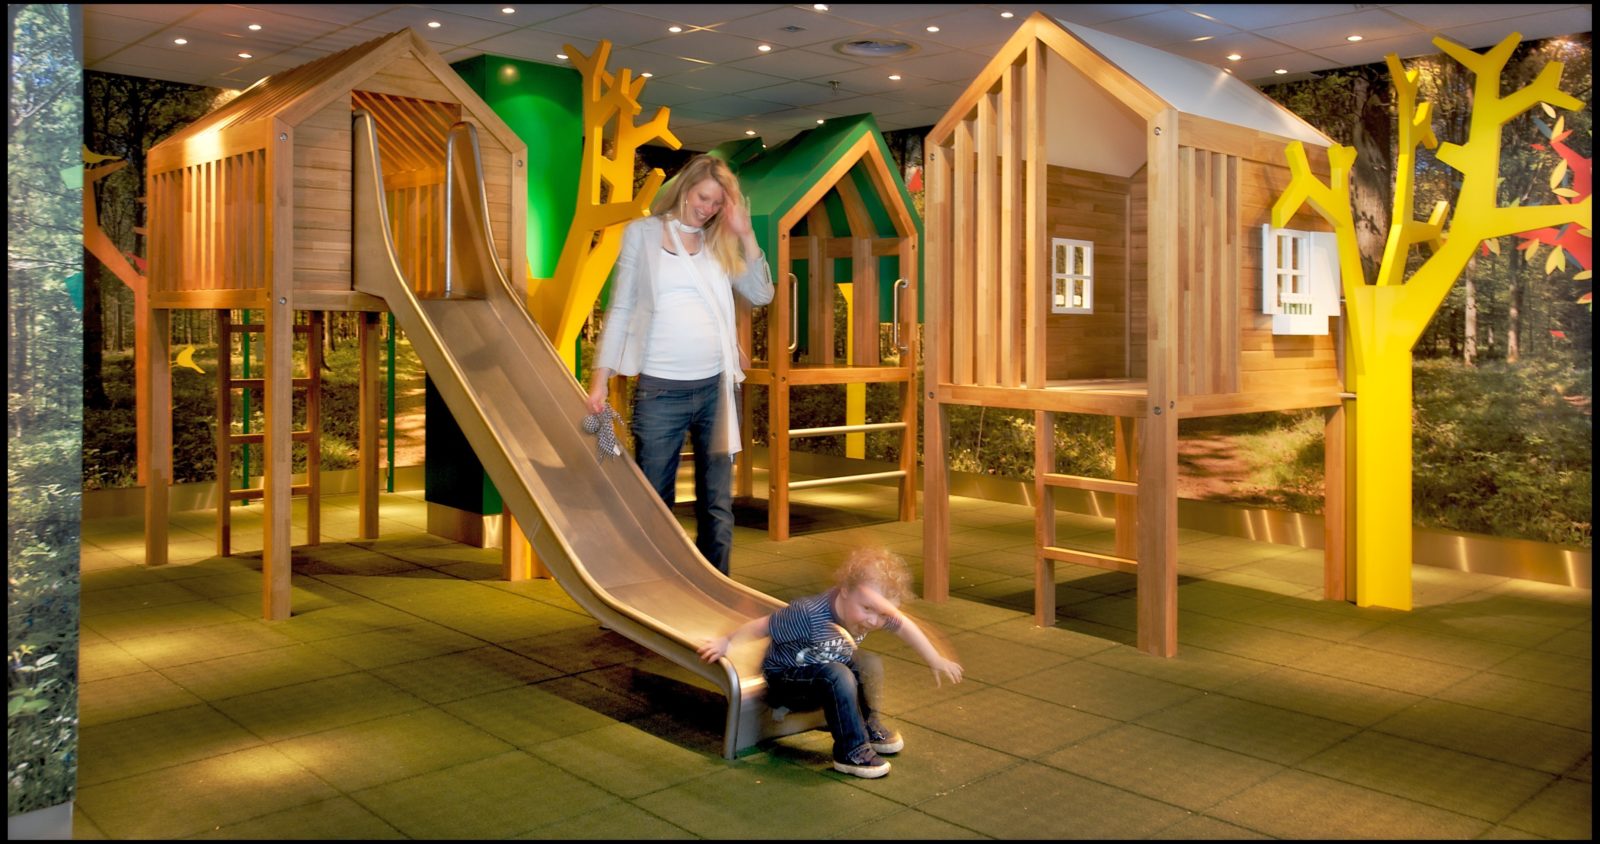 Amsterdan Schiphol play area for kids